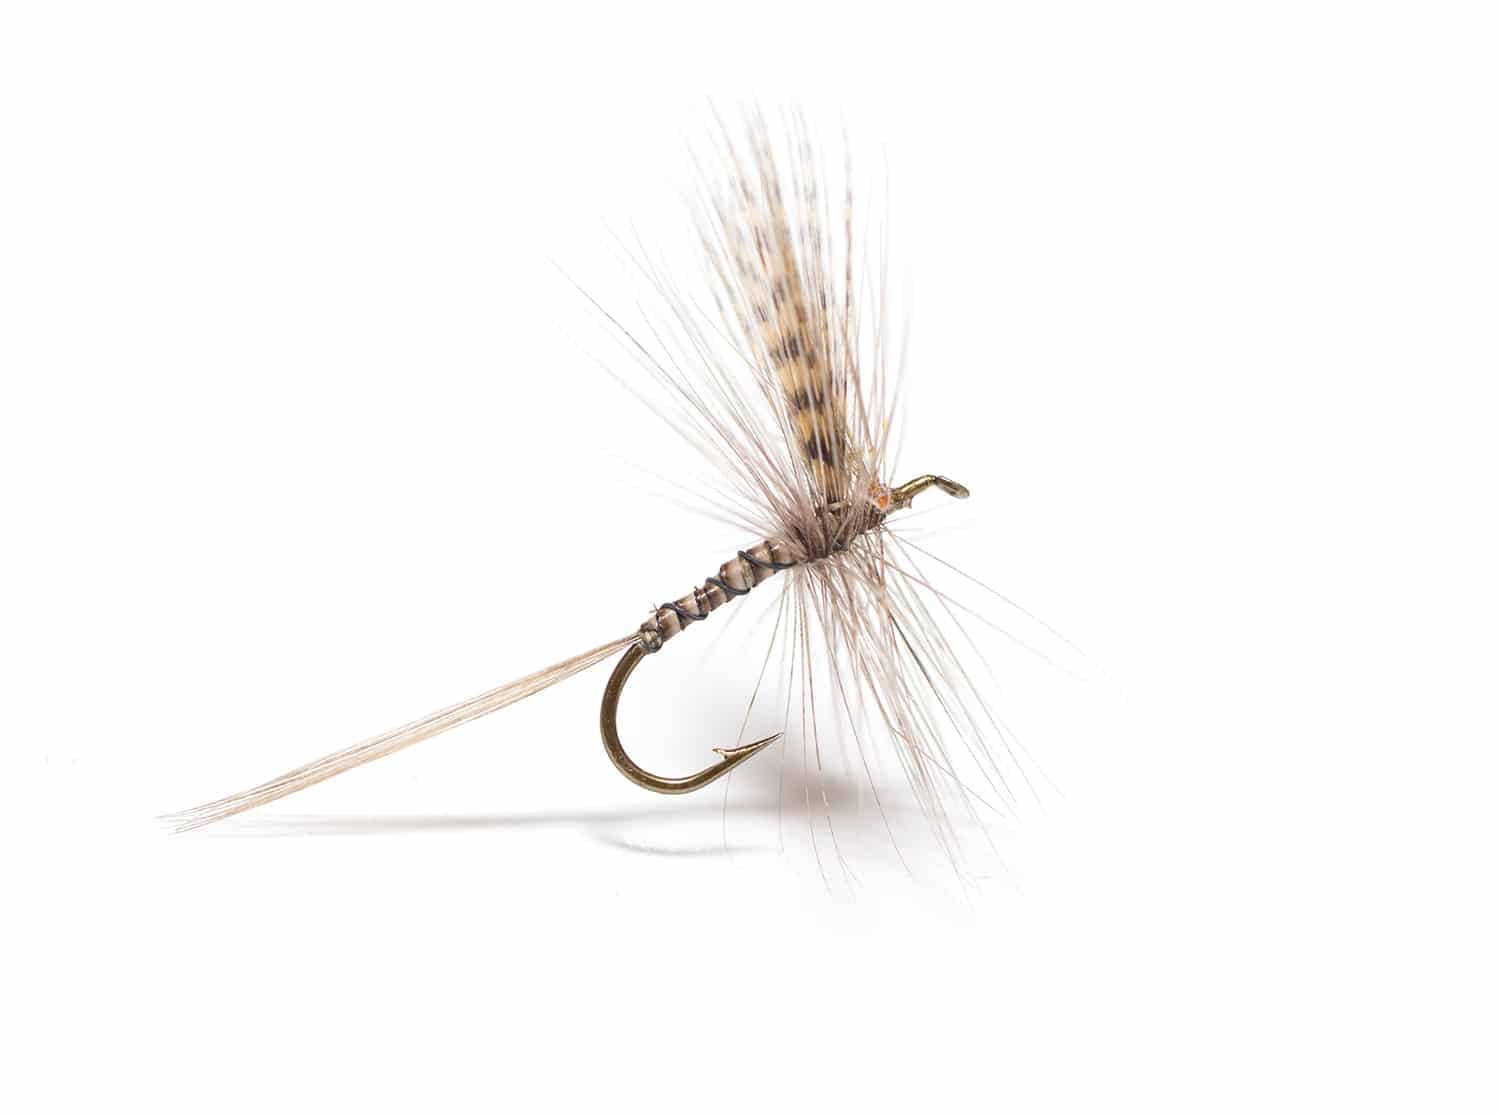 Barbless Greenwells Glory Dry Fly Fishing flies by Dragonflies 